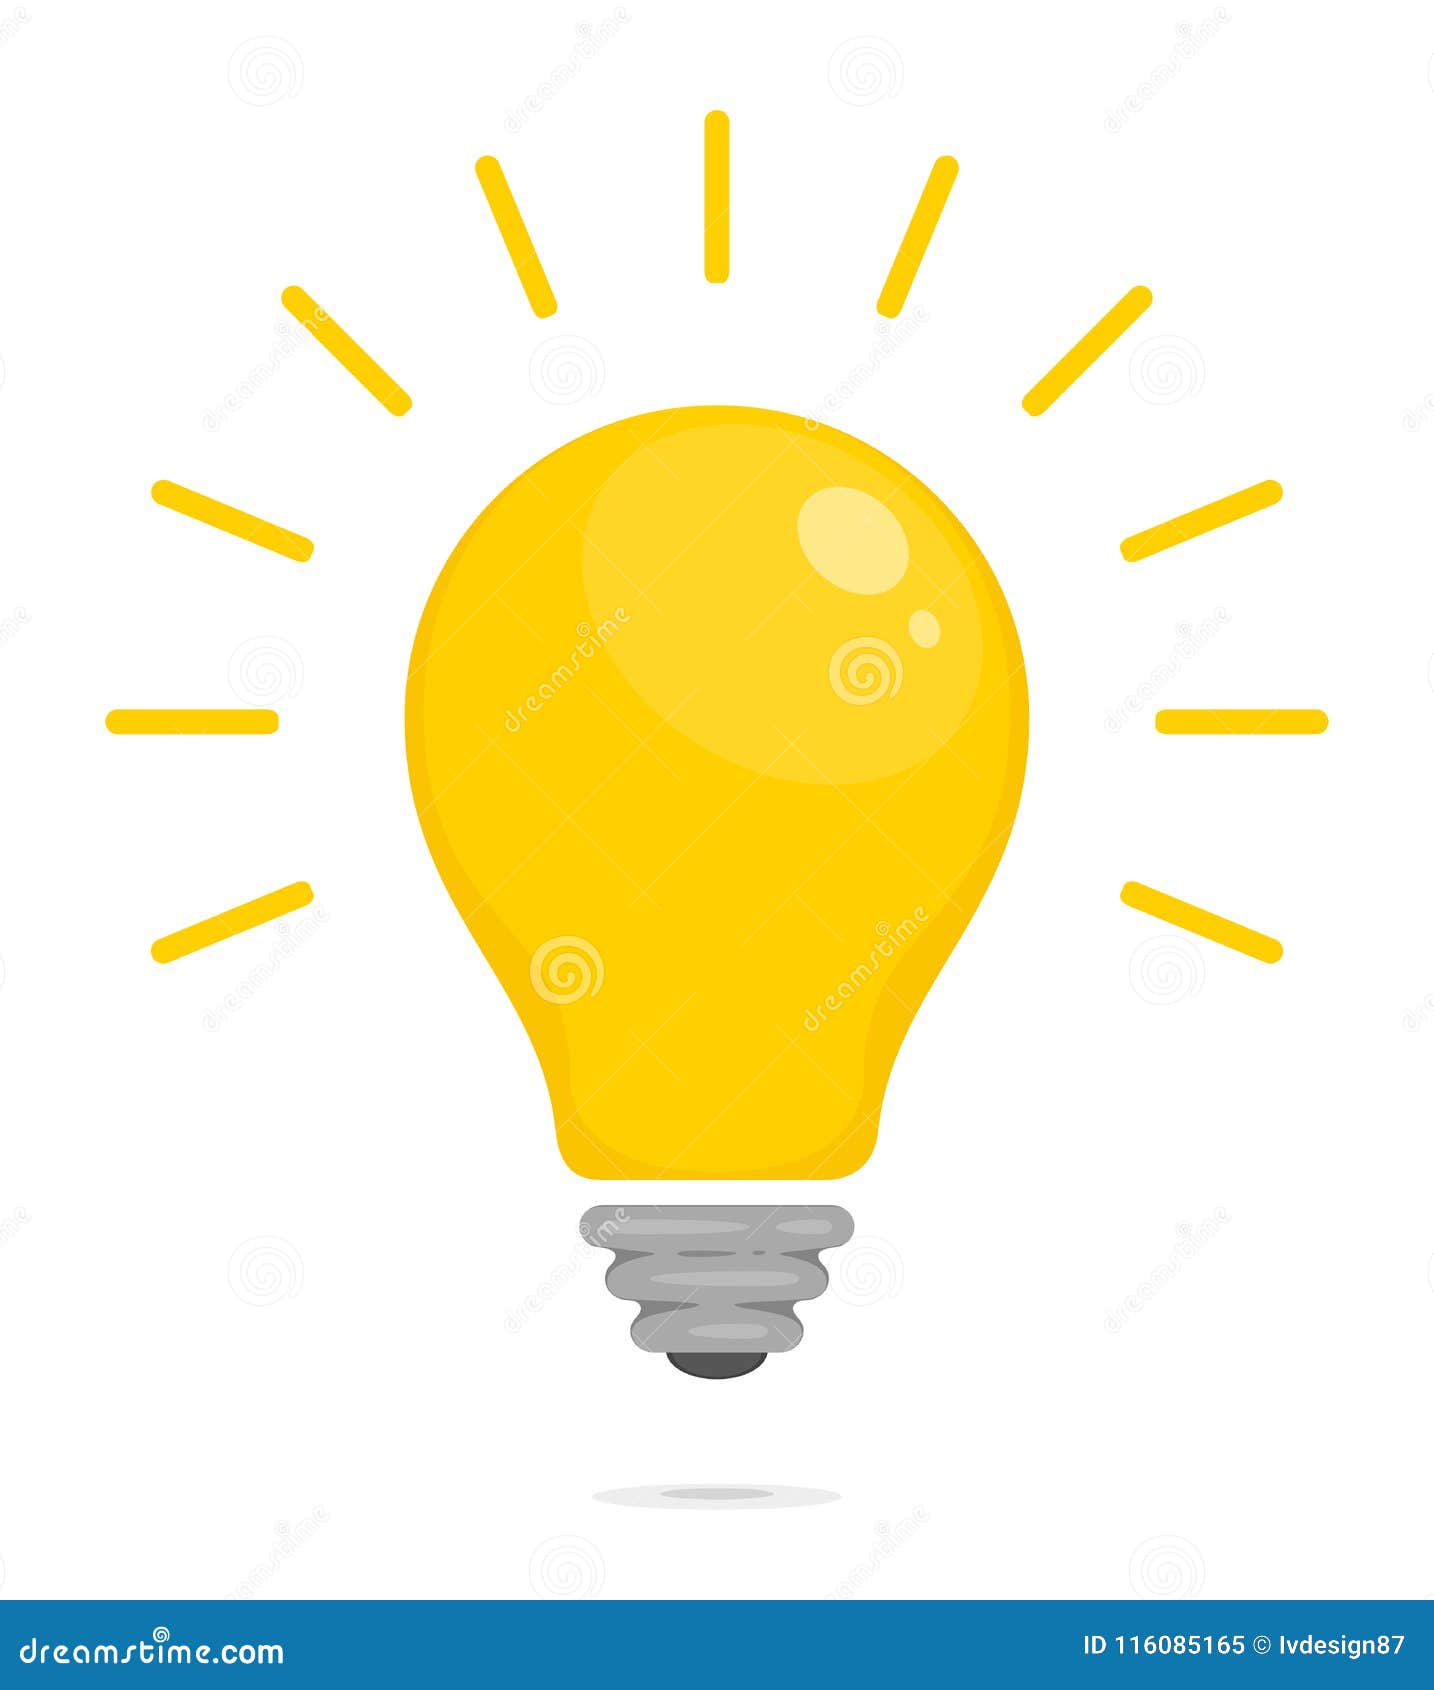 yellow glowing light bulb.  of energy, solution, thinking and idea. flat style icon for web and mobile app. 